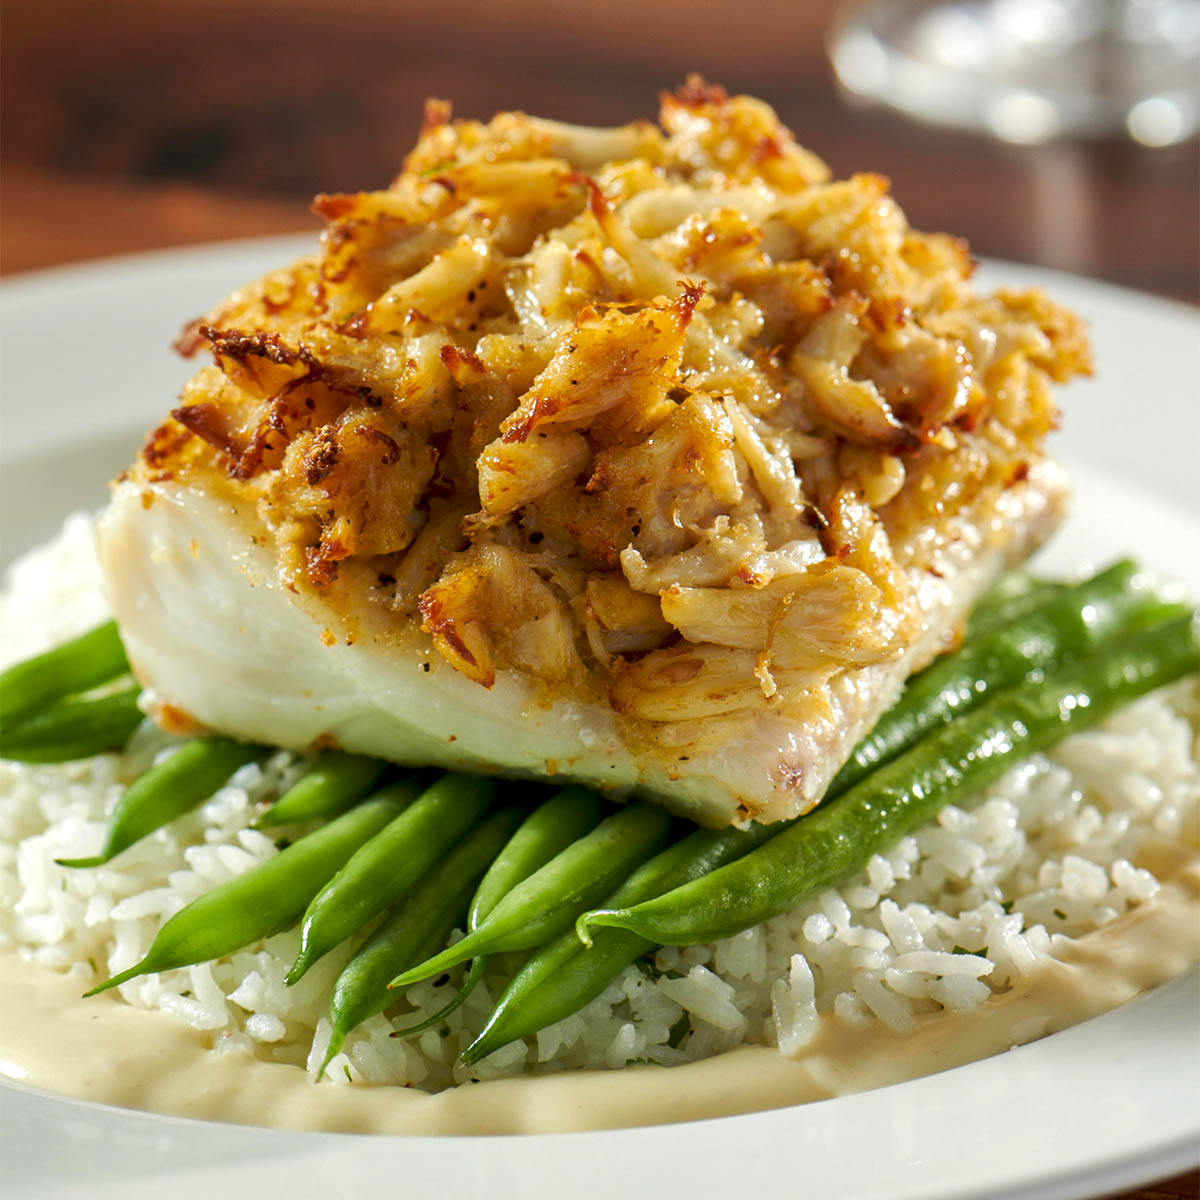 Burtons crab crusted haddock atop fresh green beans and fluffy rice at their Charlotte location